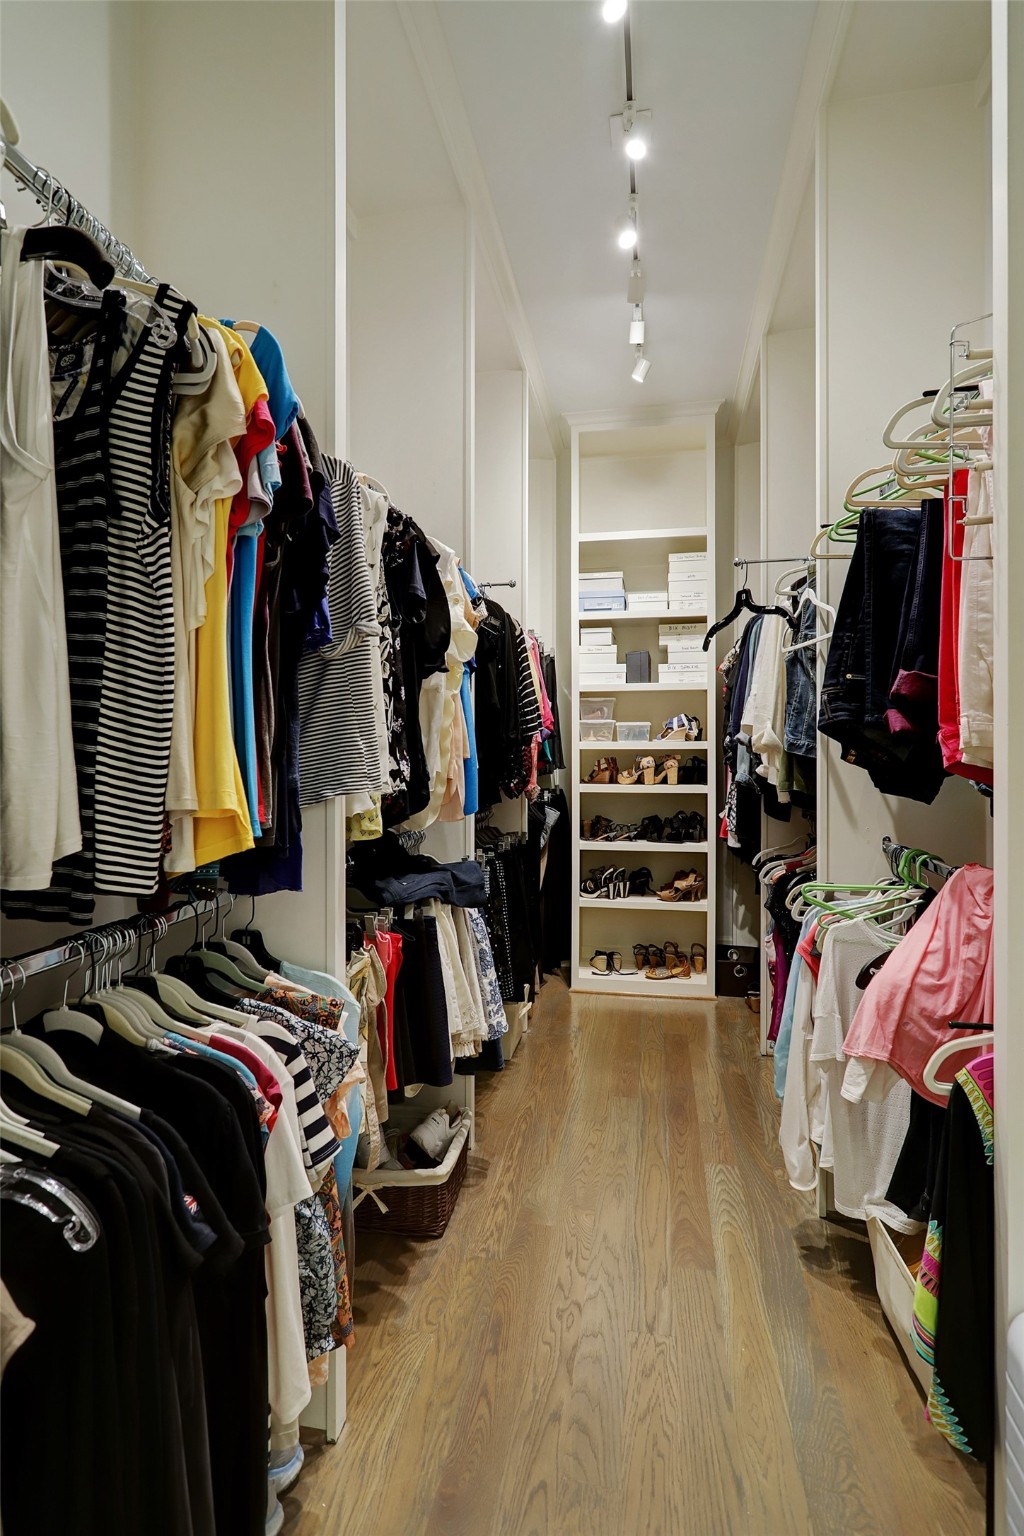 One of two enormous closets with built-in storage - a dream closet!